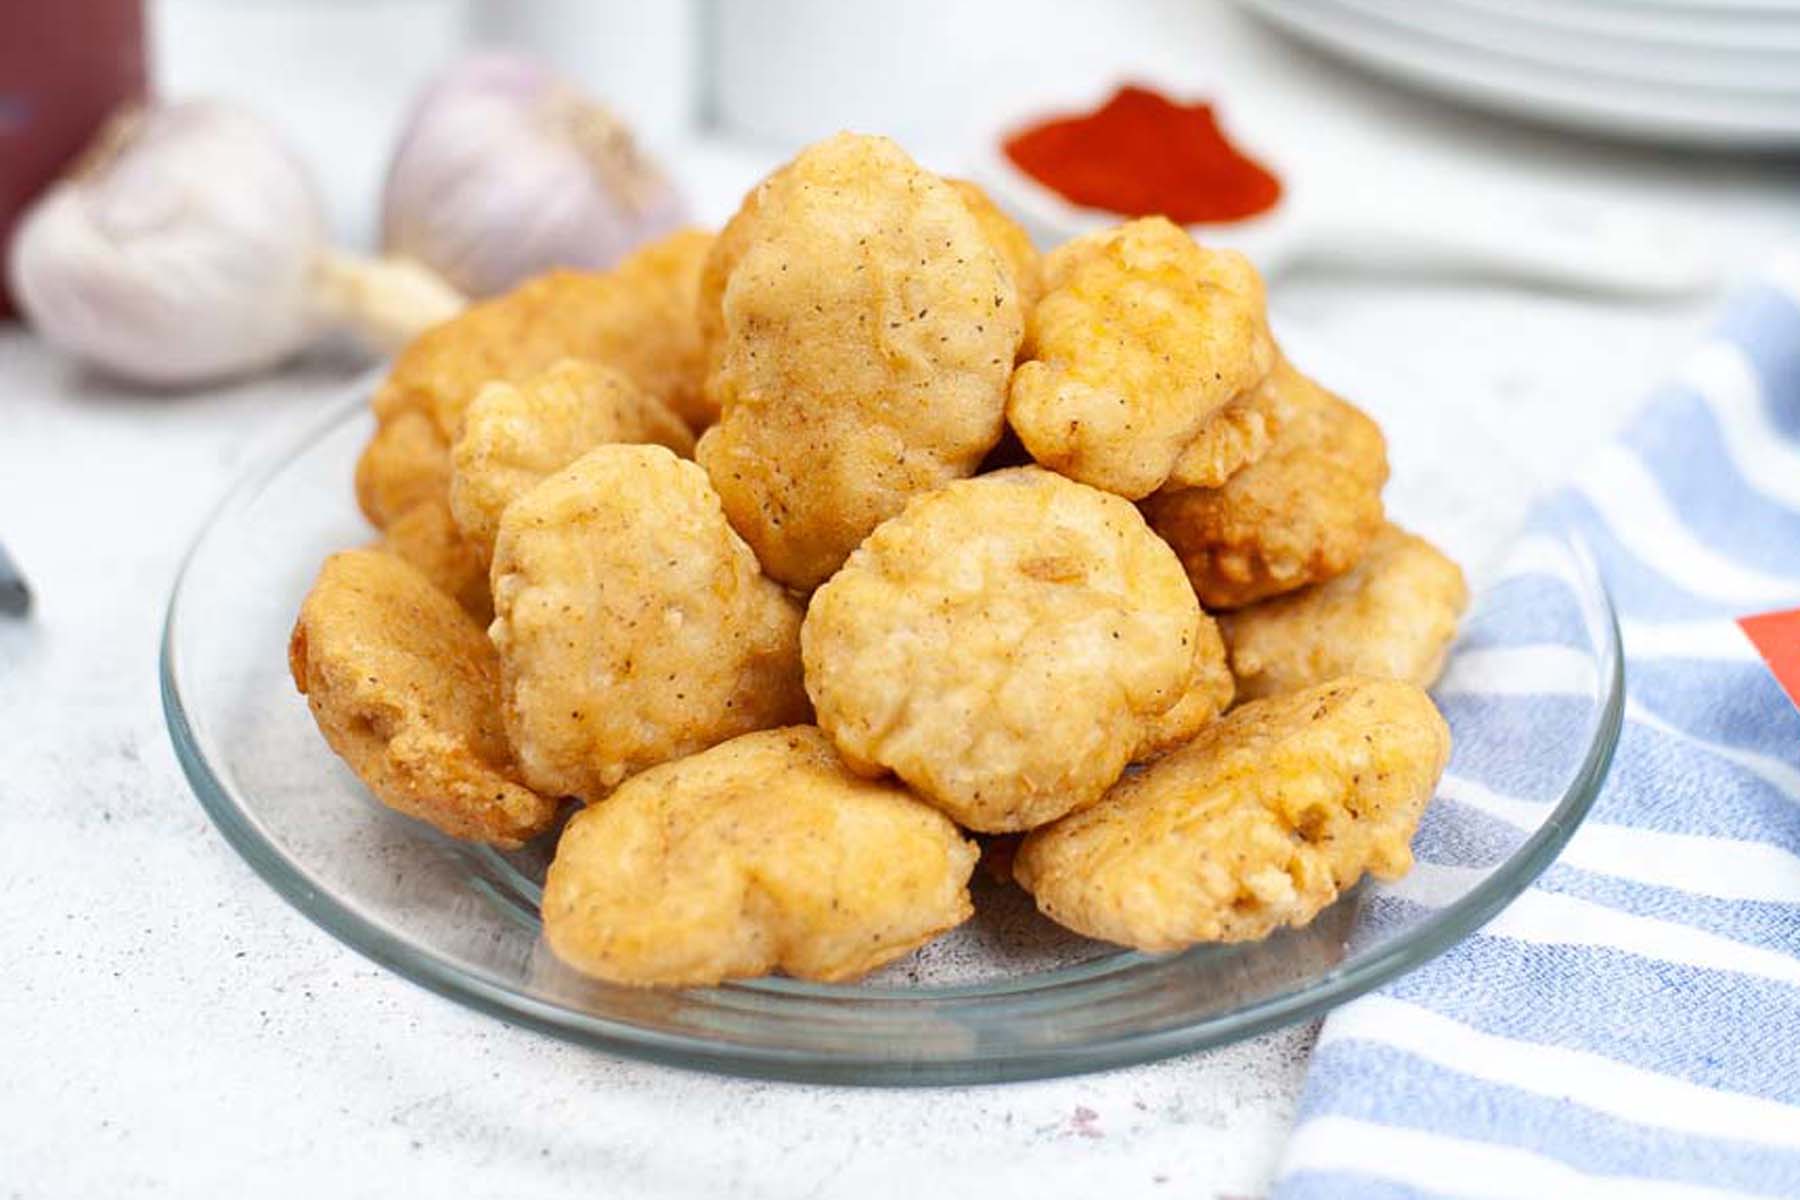 Chicken nuggets piled on a clear plate.